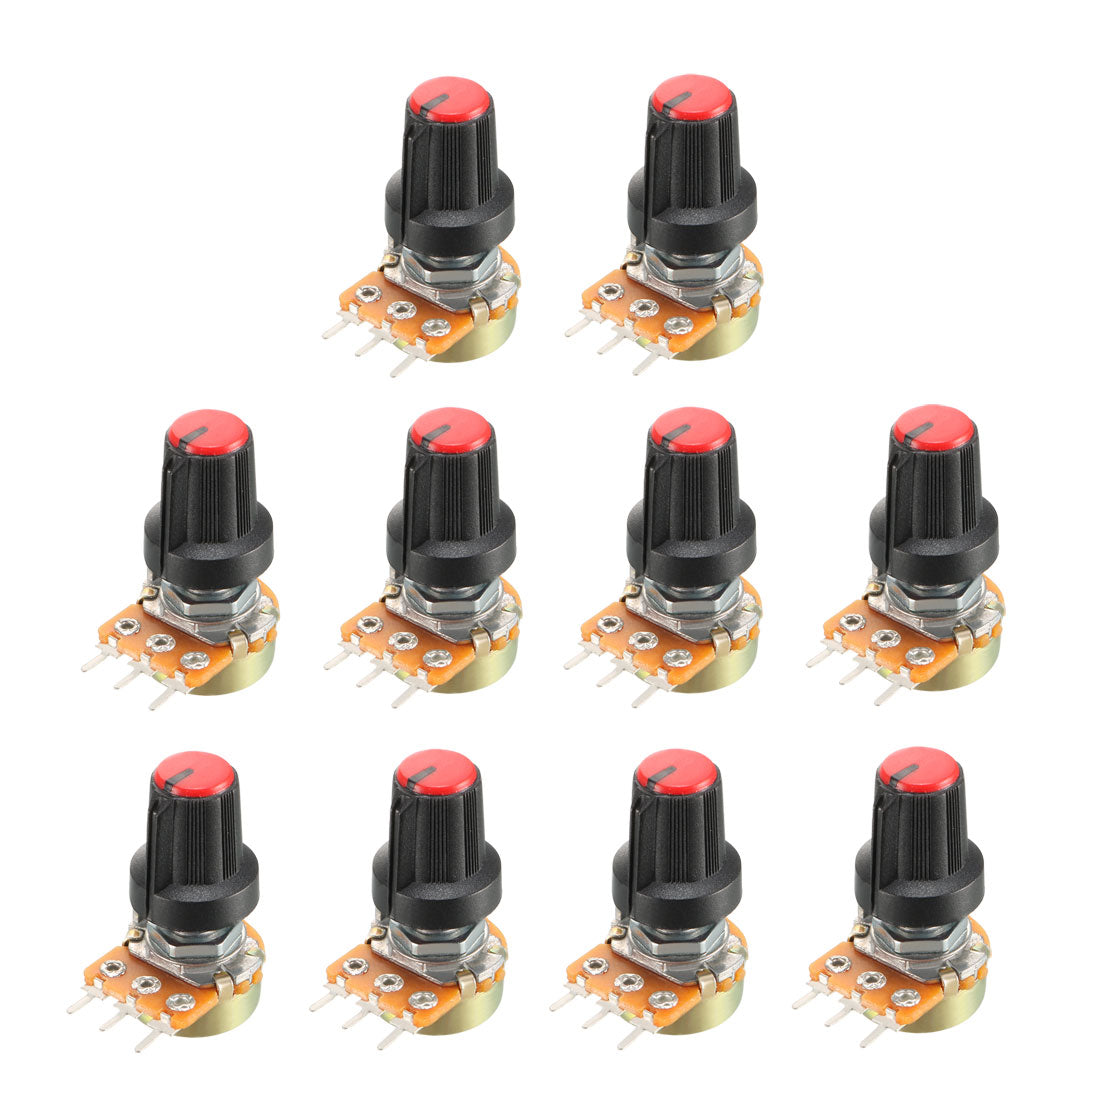 uxcell Uxcell 10Pcs 20K Ohm Variable Resistors Single Turn Rotary Carbon Film Taper Potentiometer with Knob